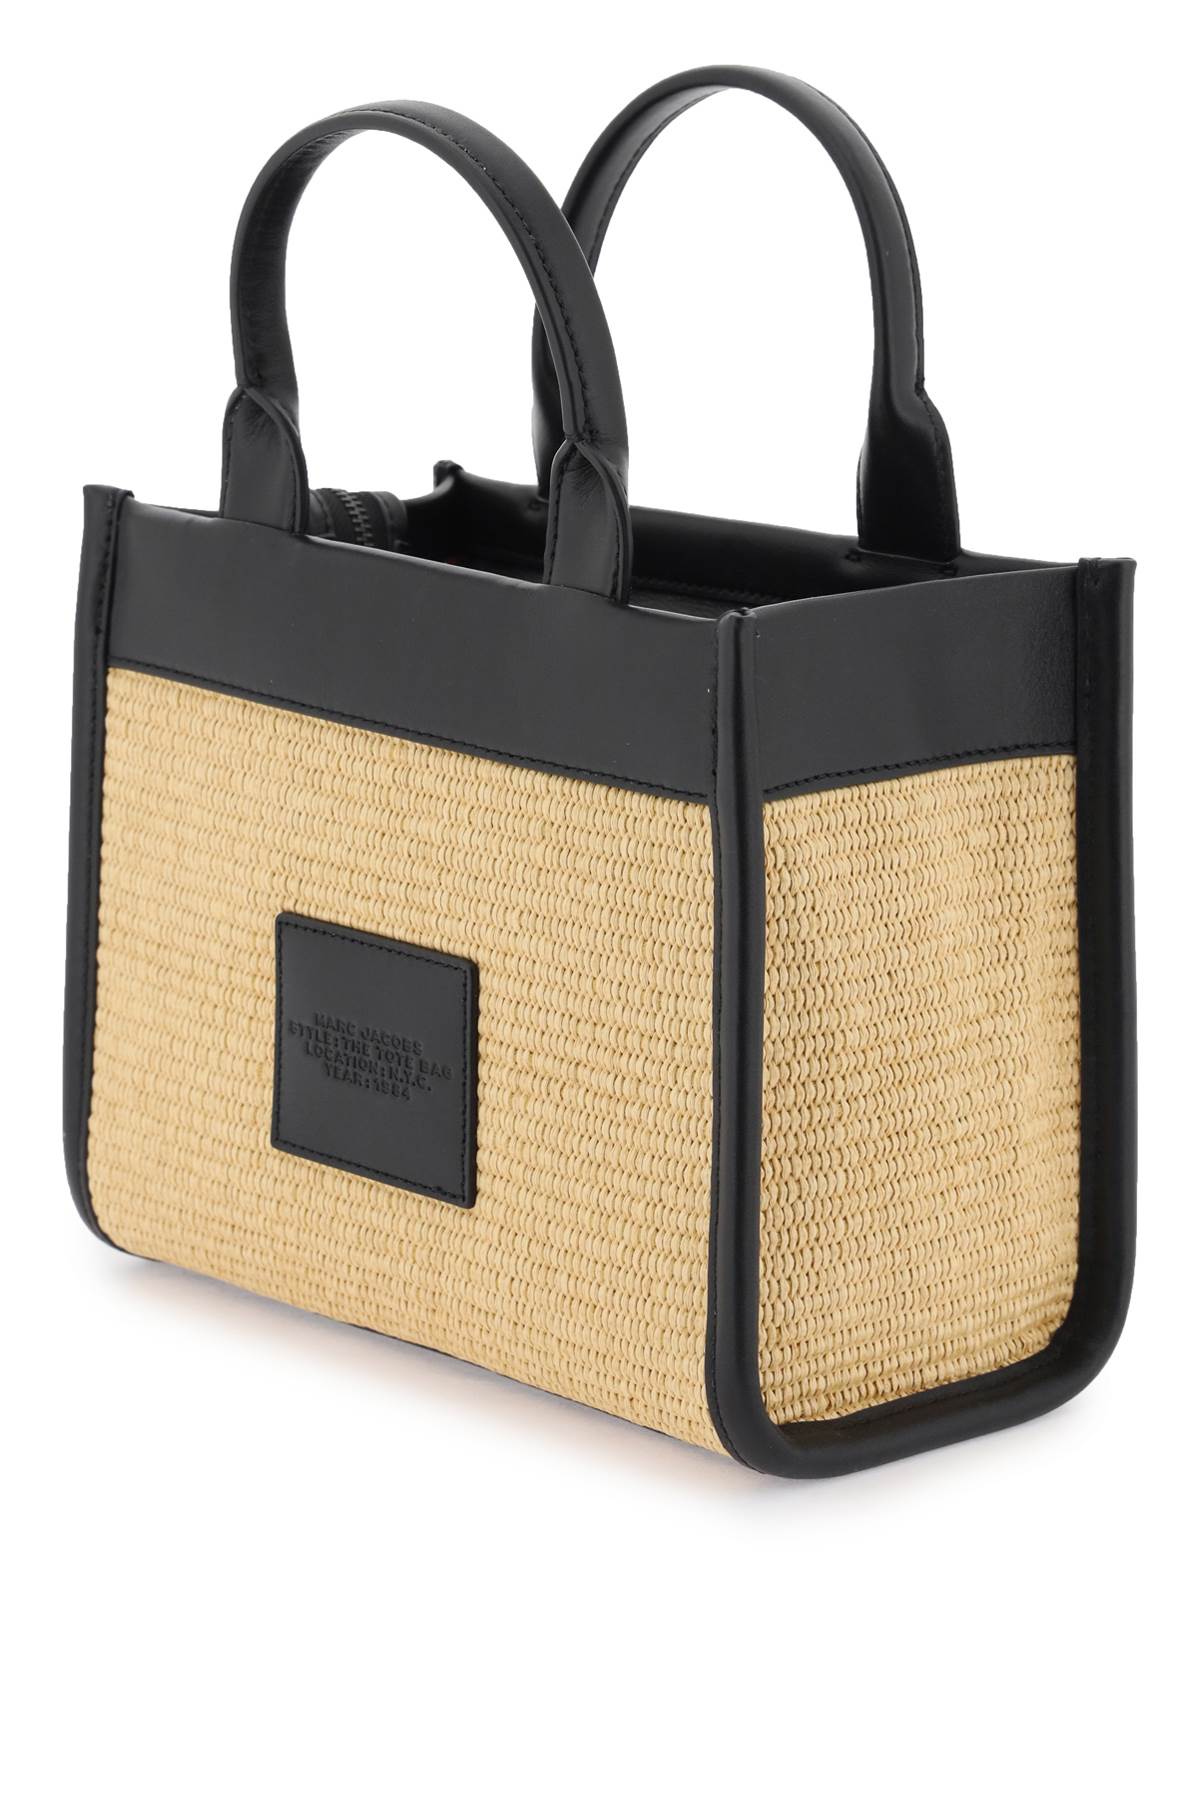 THE WOVEN MEDIUM TOTE BAG for Women - Marc Jacobs